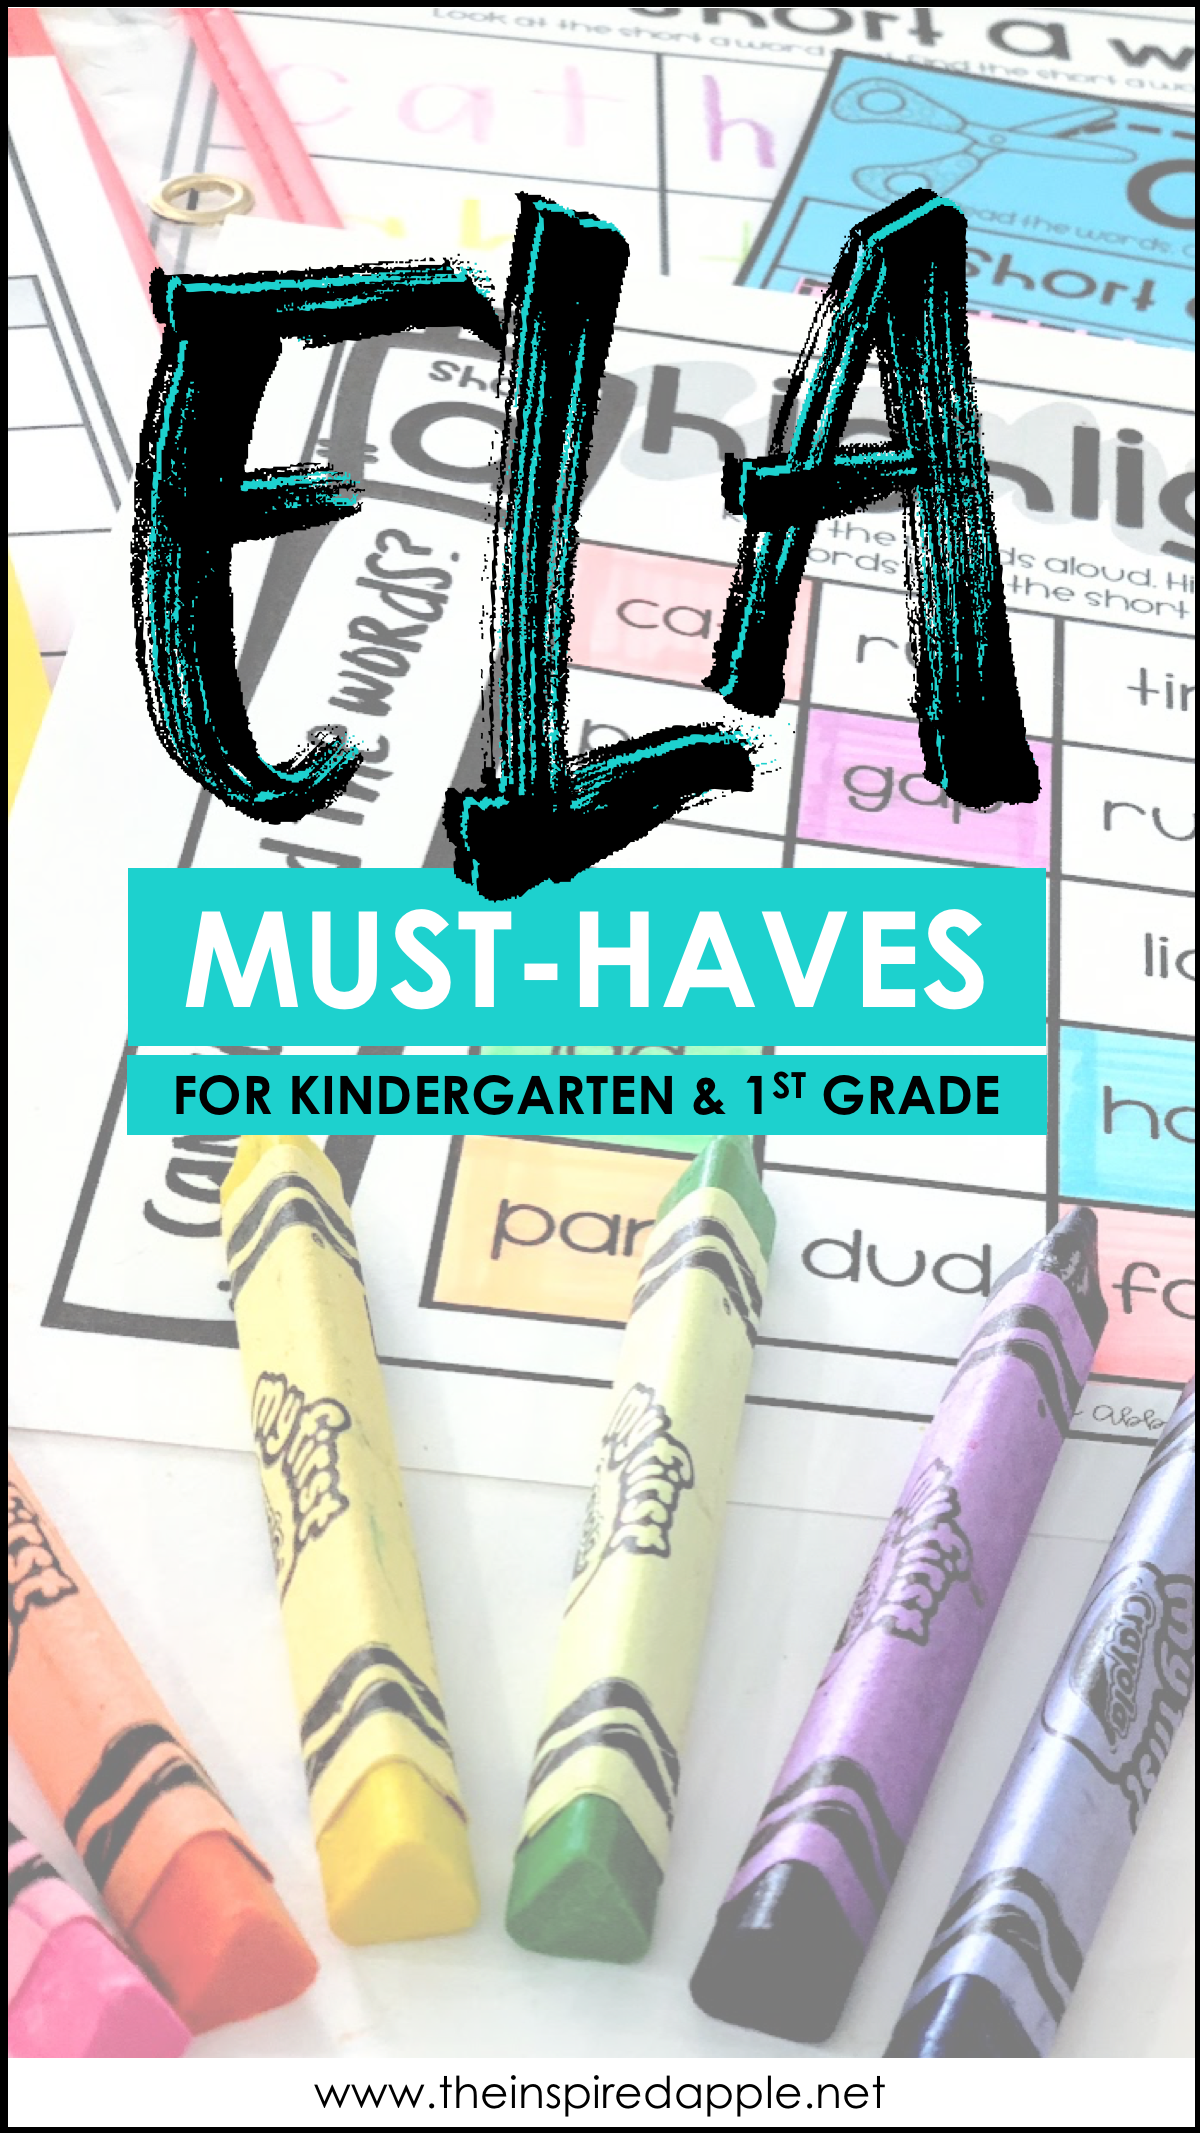 If you're looking for great ELA resources for kindergarten and first grade, this post is a MUST READ. It's full of activities and ideas for everything from guided reading, to sight word instruction, to handwriting, to read-alouds, to literacy stations and MORE! It's an excellent resource for new teachers or ANY teacher in the primary grades! Babbling Abby from The Inspired Apple will help you get your reading block planned!